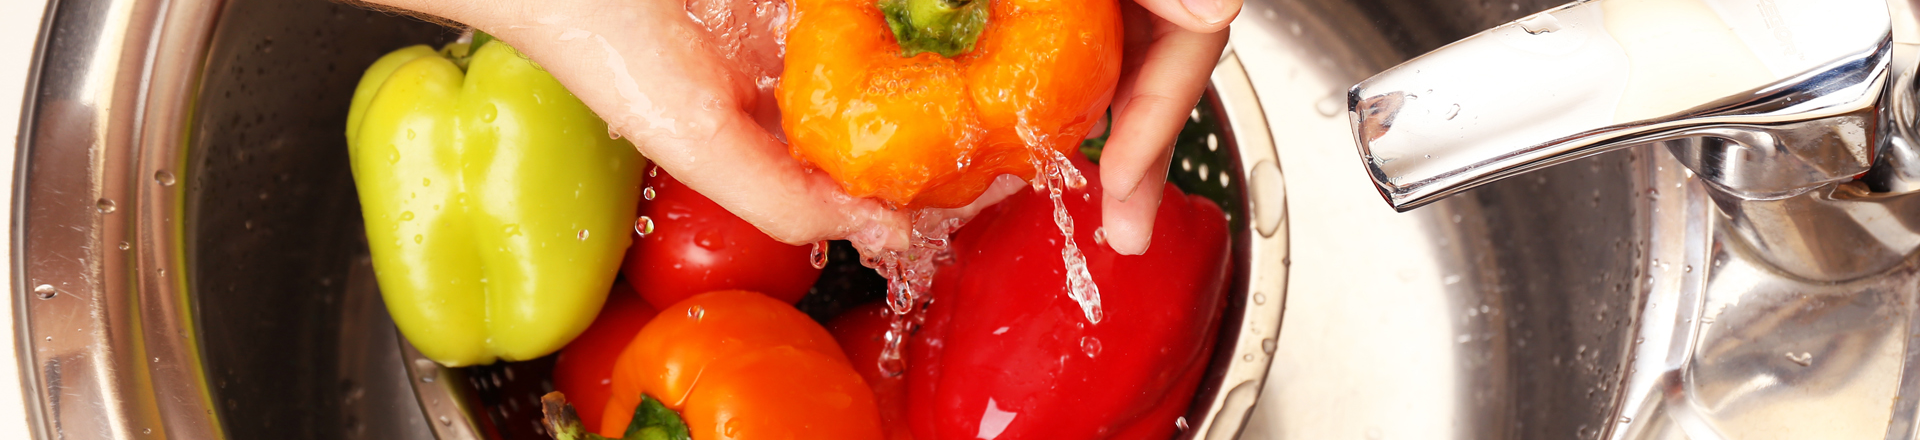 women washing bell peppers, which are on the Environmental Working Group's dirty dozen foods list because they have tested positive for higher pesticide residues.